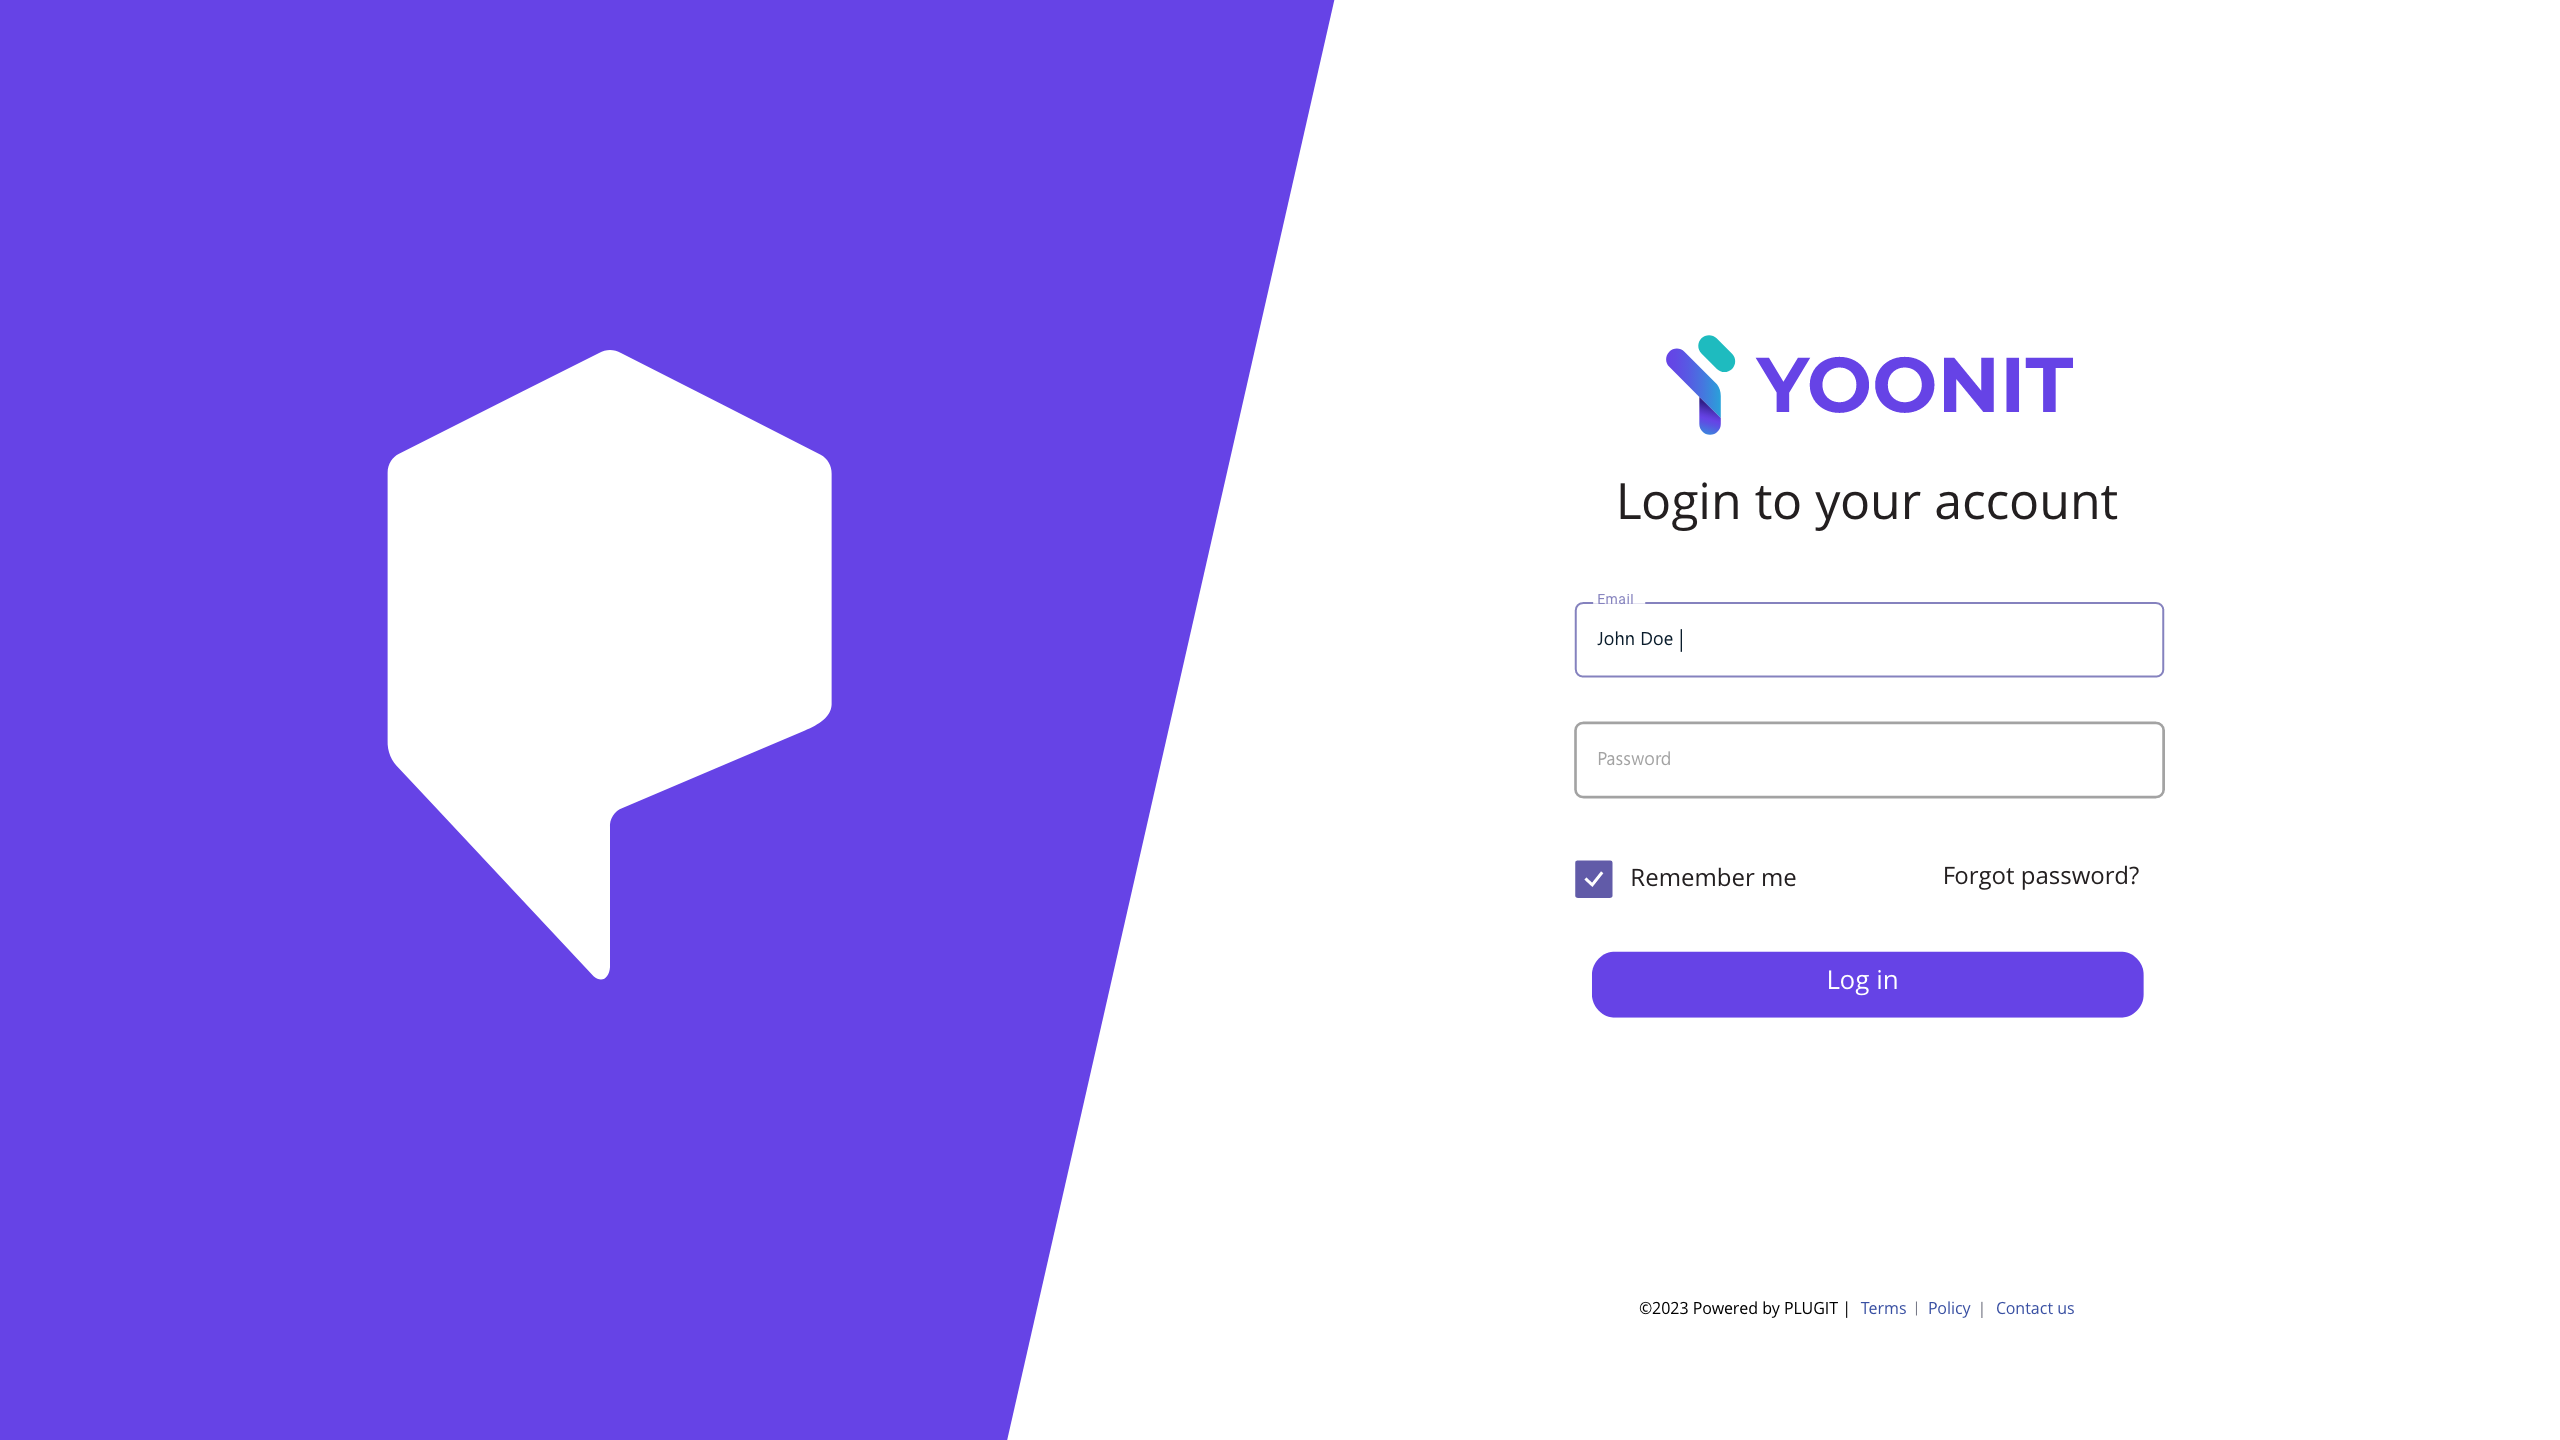 Welcome to YOONIT!